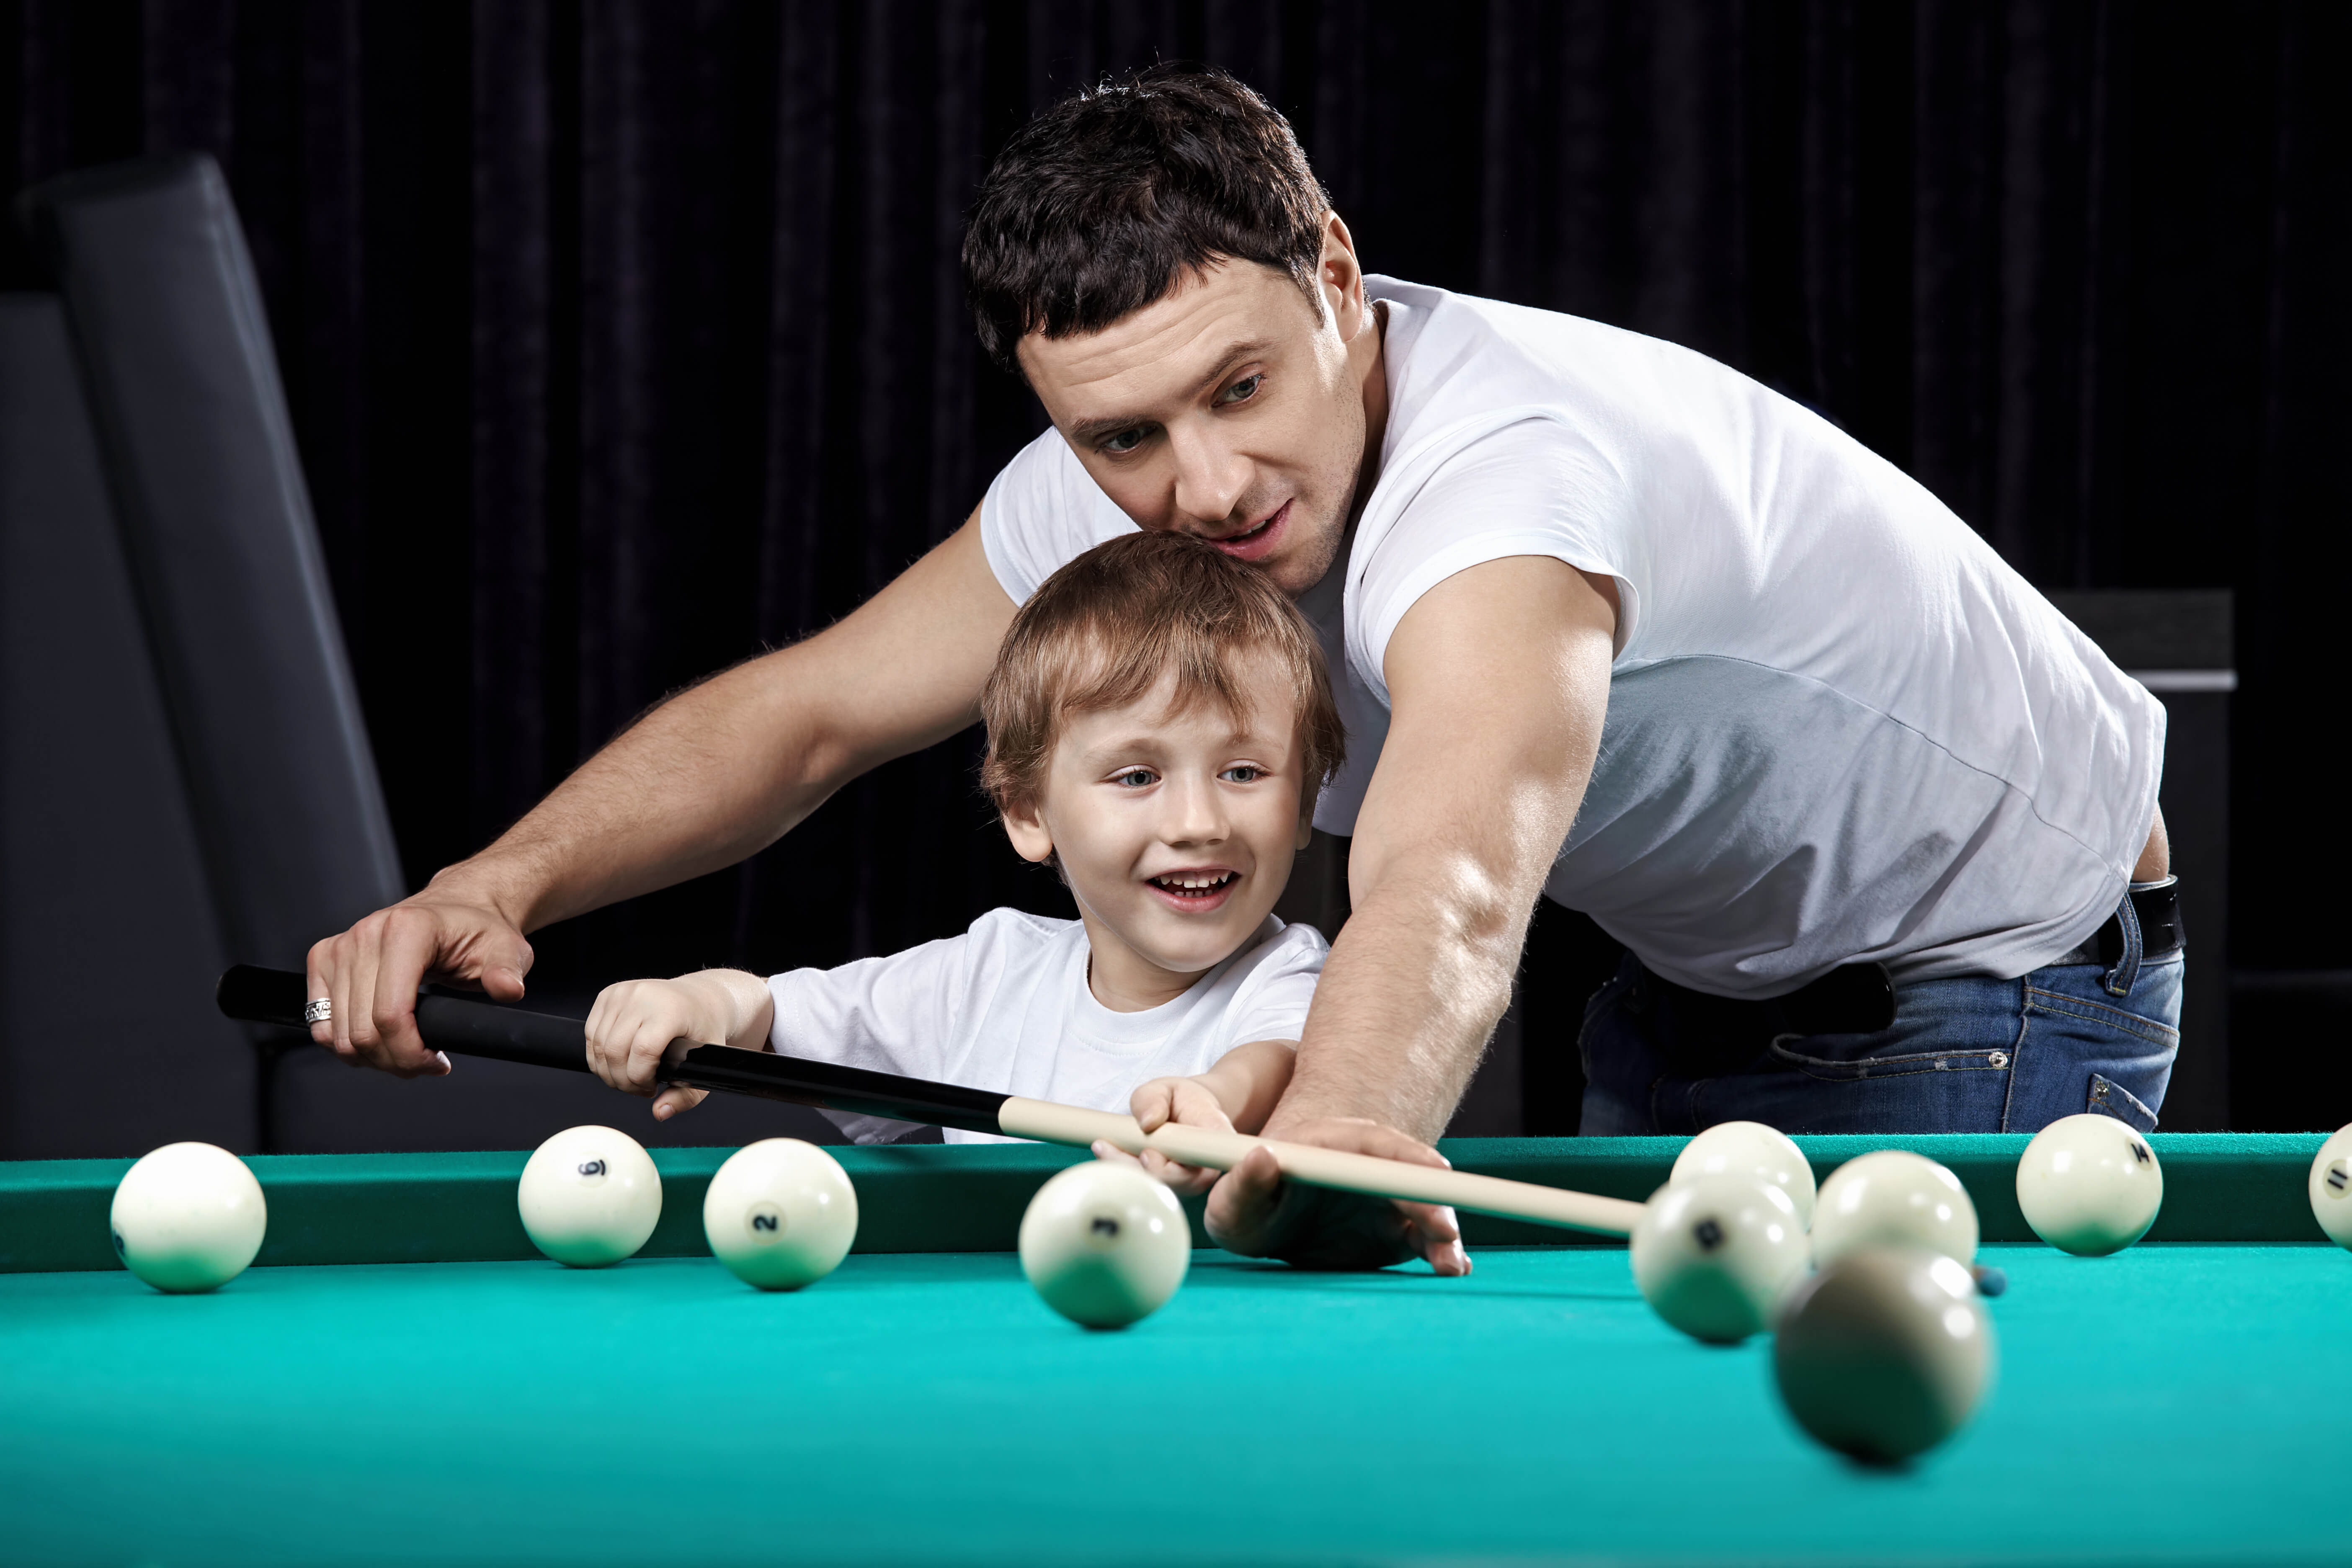 Father and son play pool billiards together